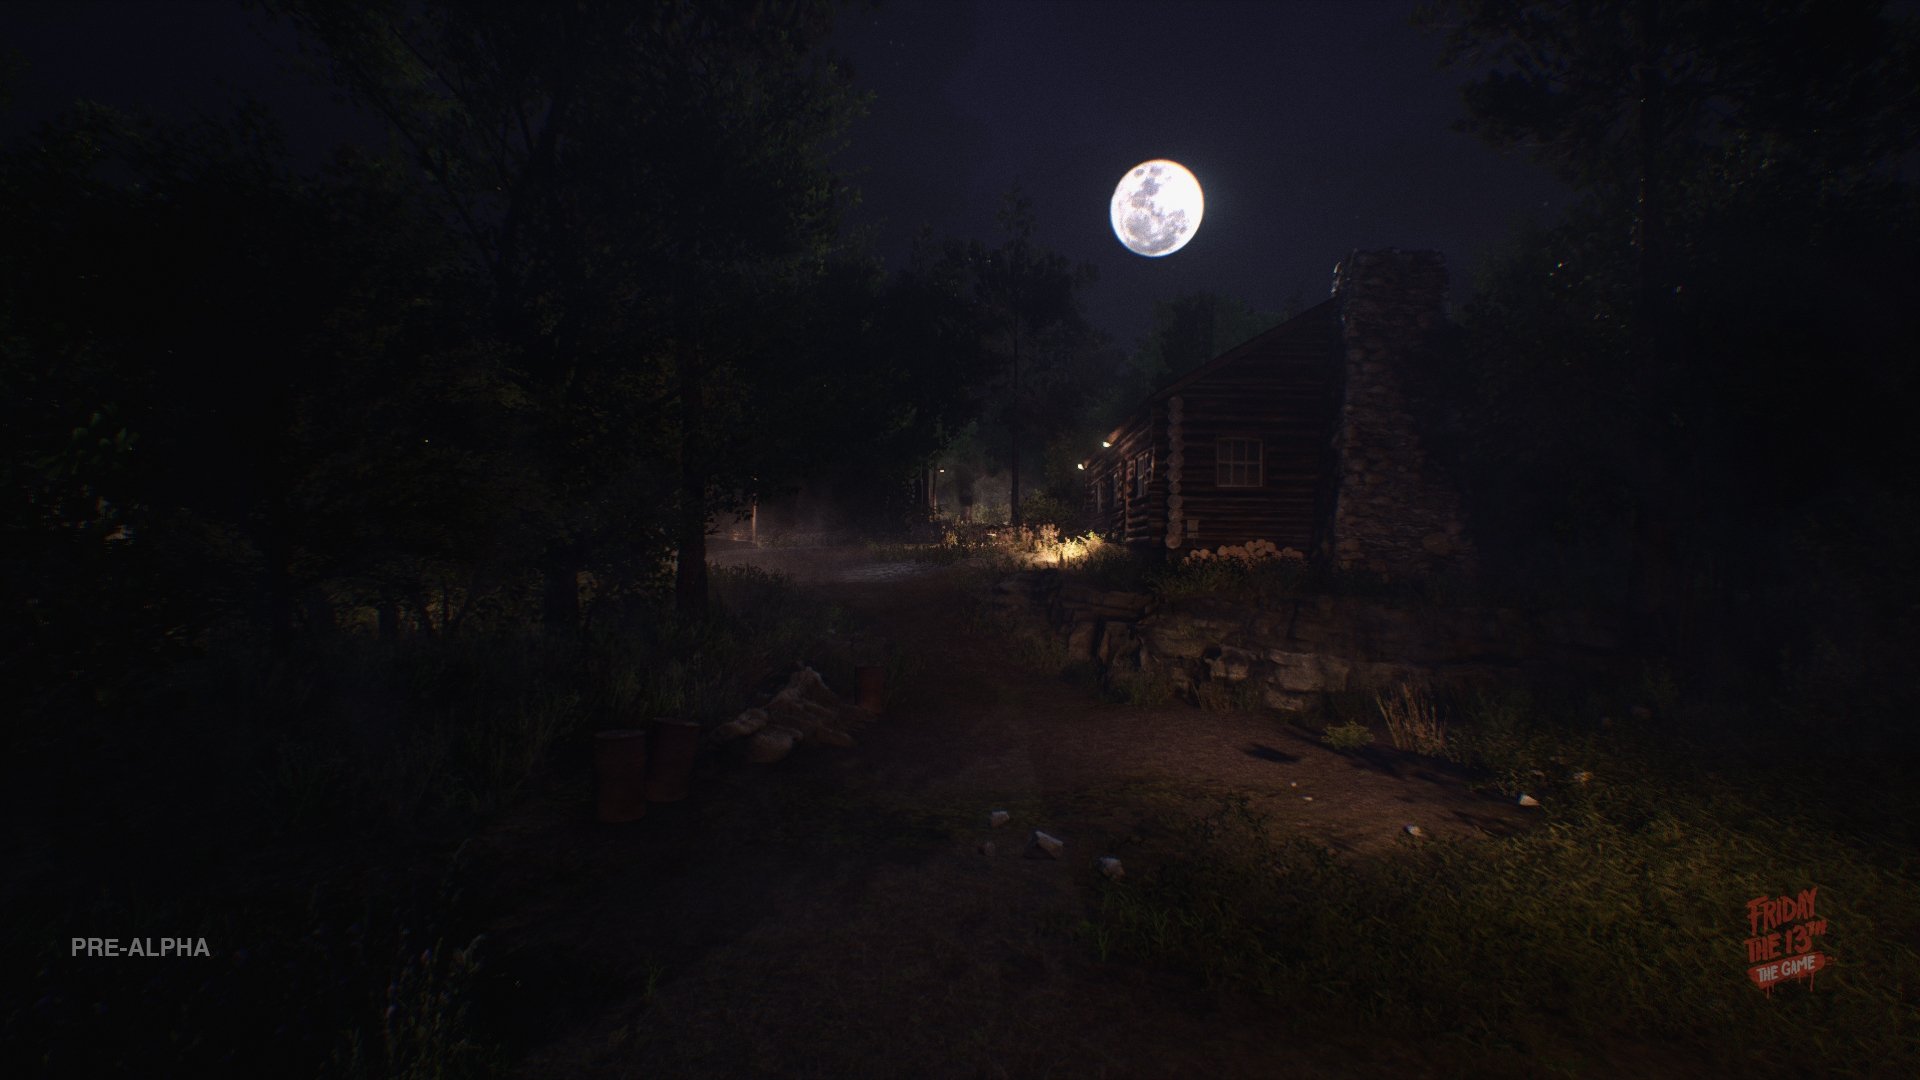 Download Friday the 13th - My Abandonware